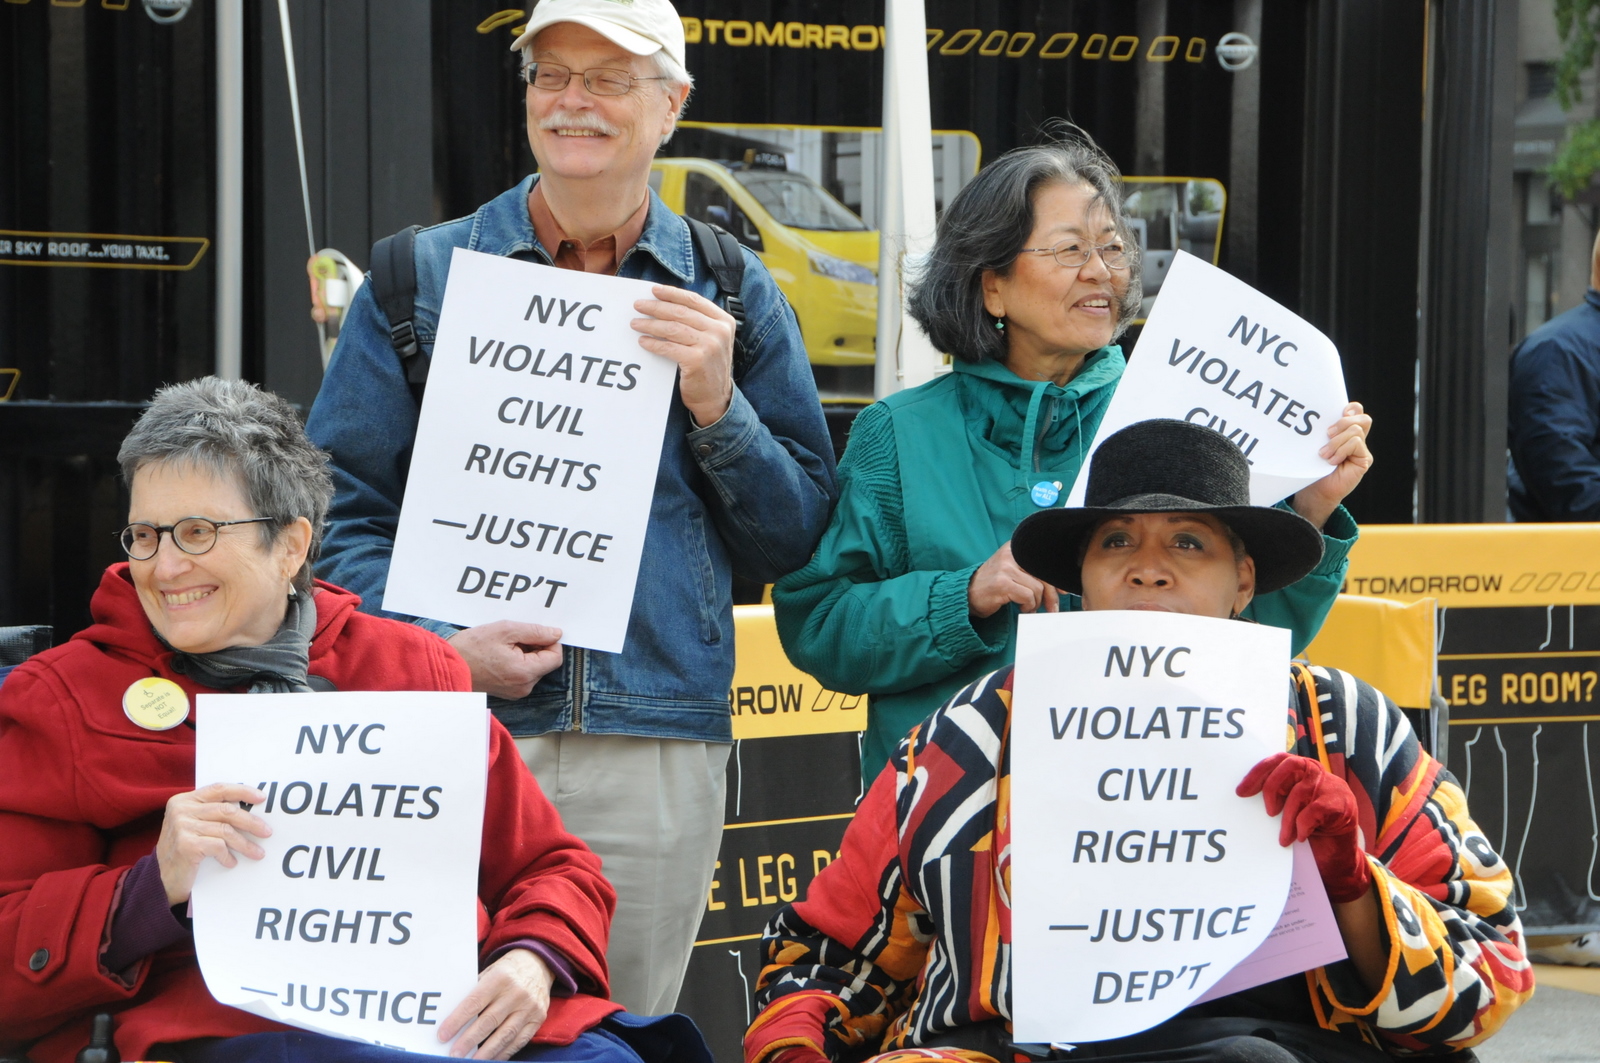 photo of four of the demonstrators holding signs with a Justice Department quote, New York City Violates Civil Rights